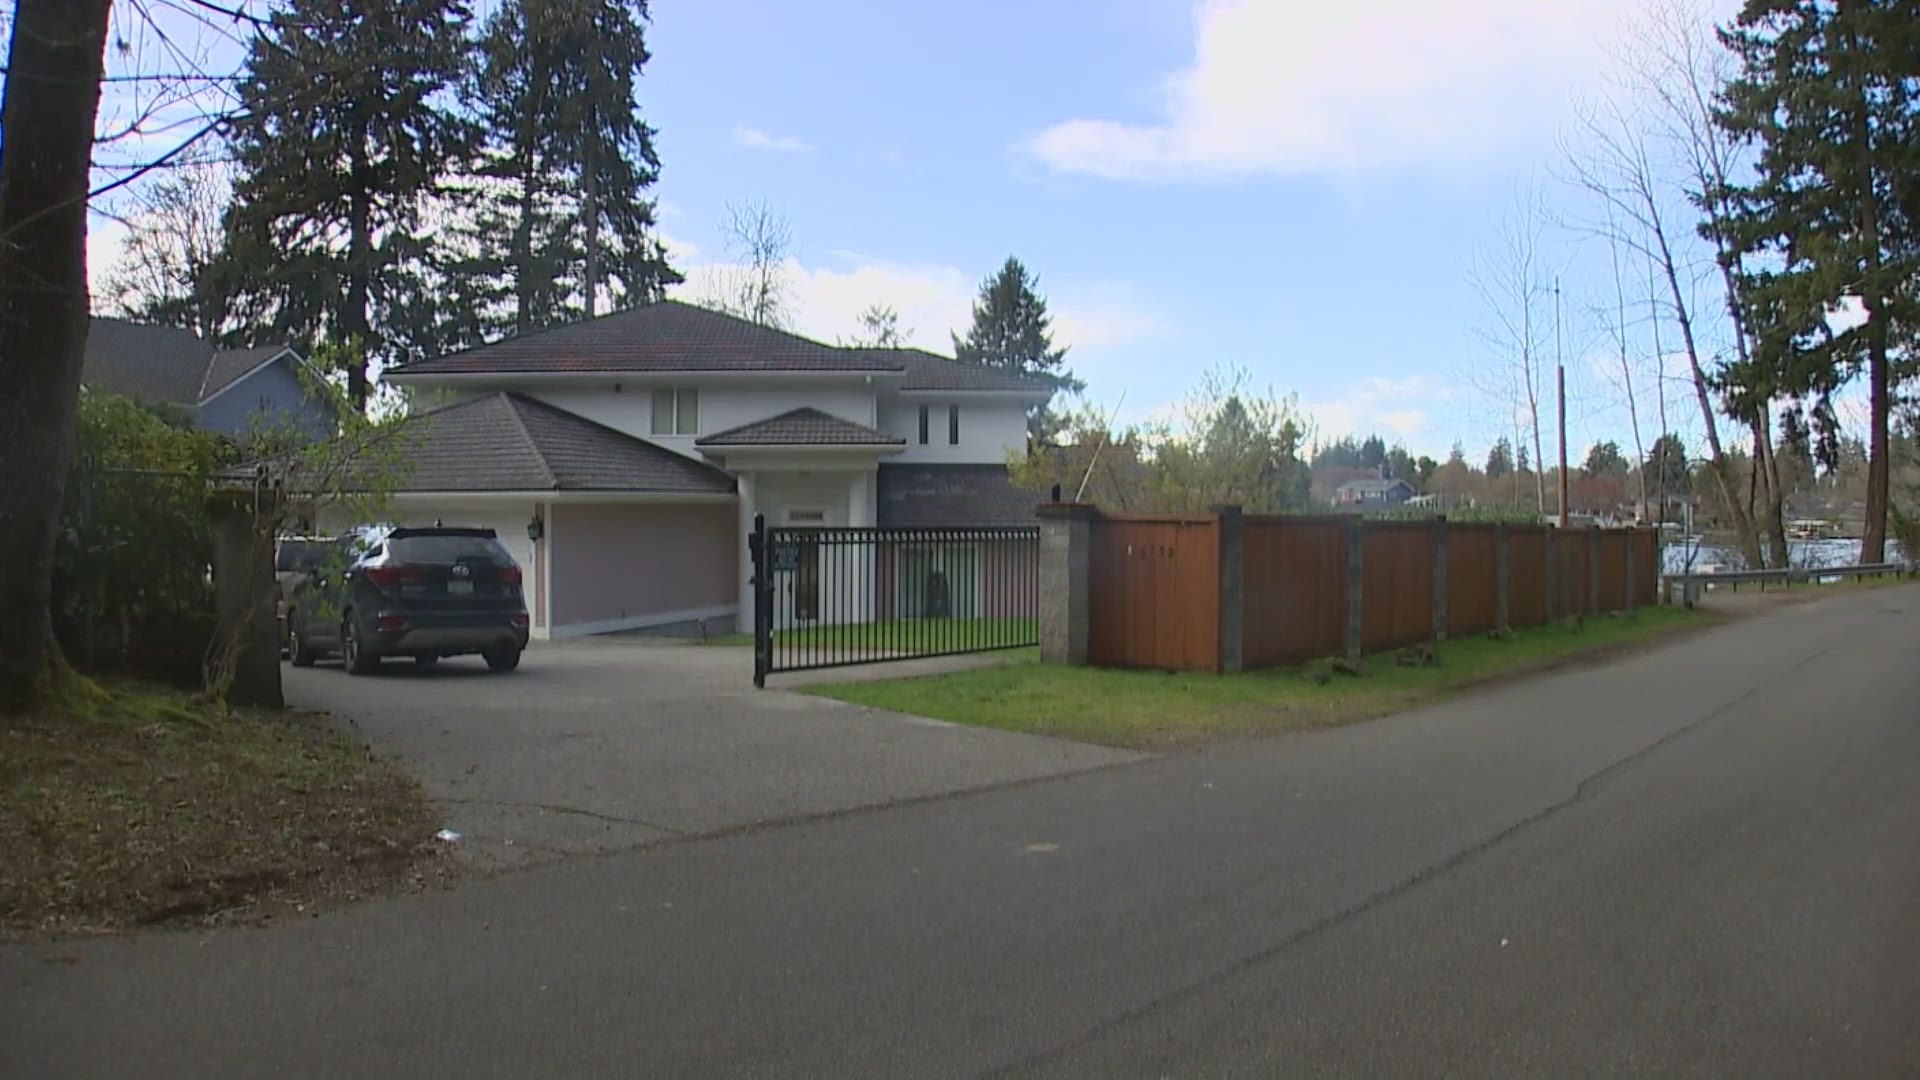 A Lakewood man is fighting to keep his home after the city of Lakewood ordered it to be condemned and demolished to make way for a parking lot.